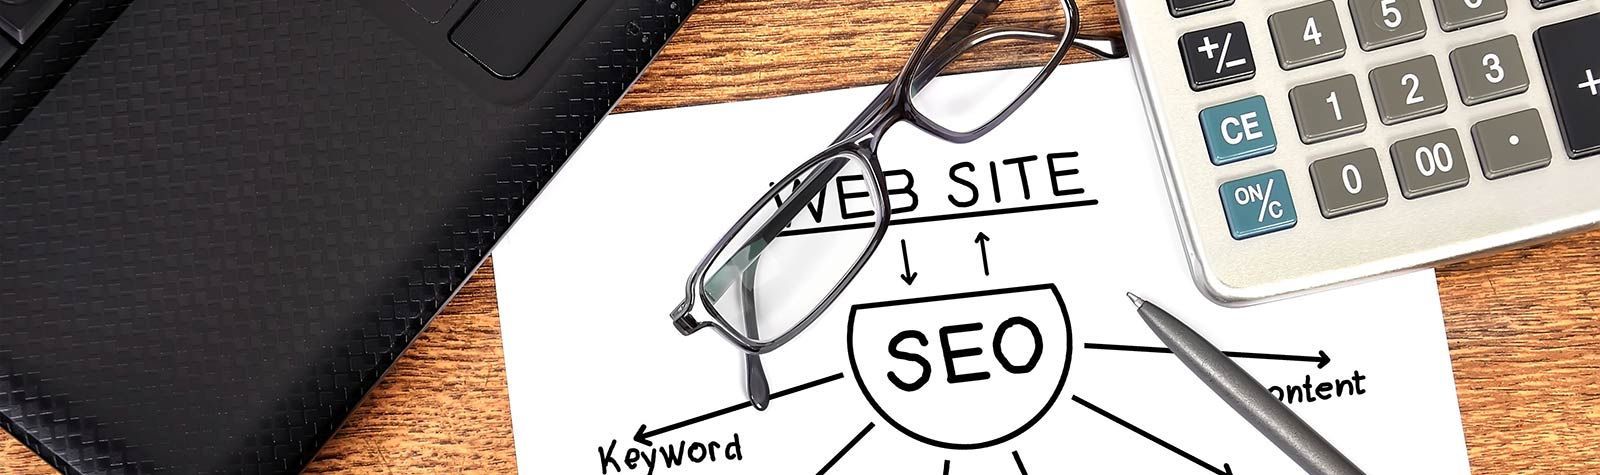 Illustration of why keywords are important for SEO